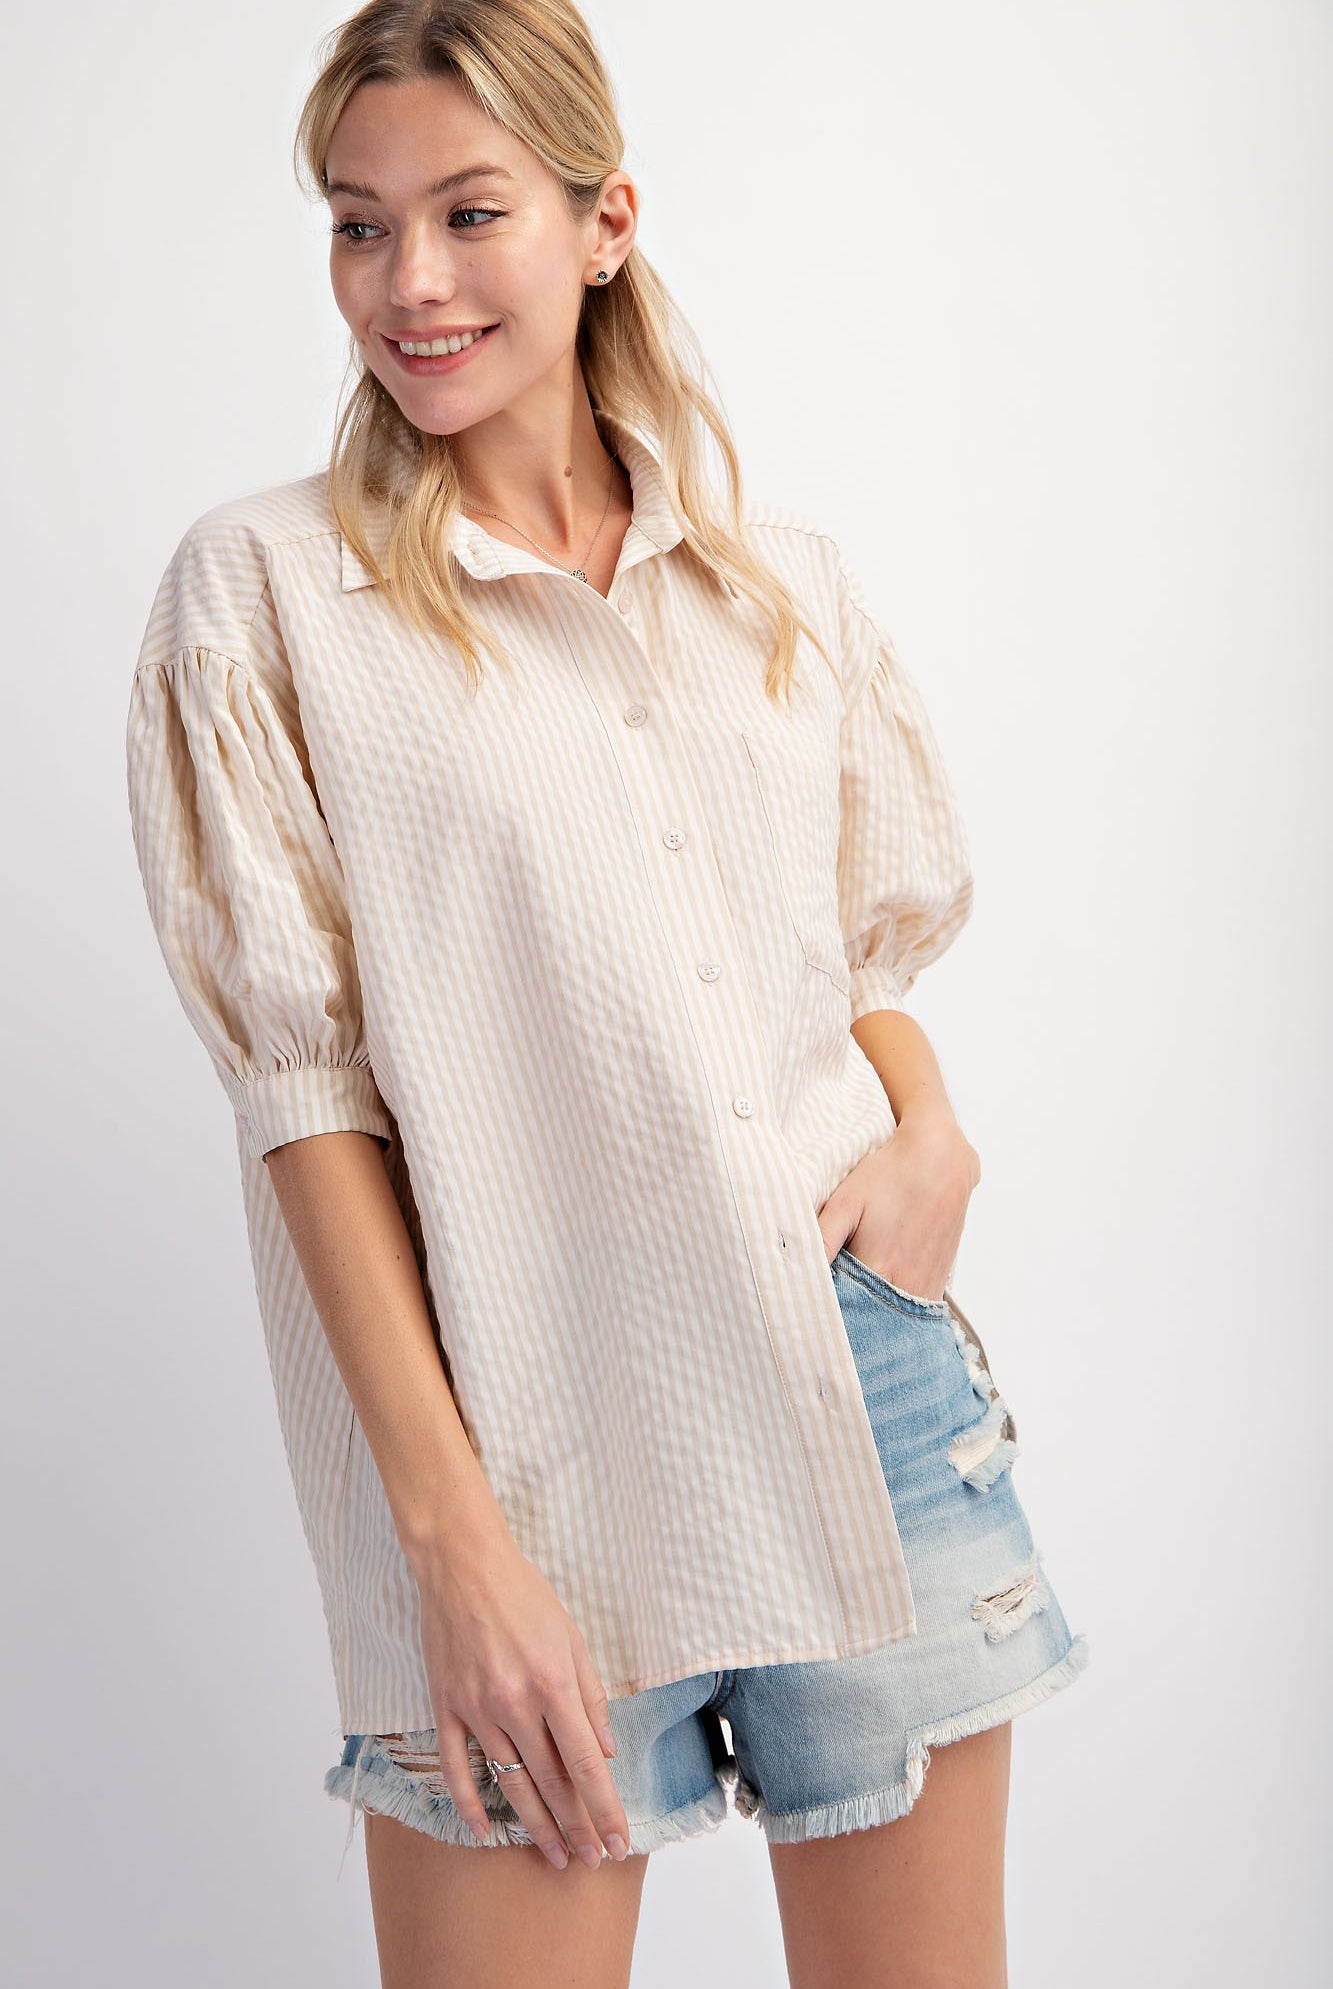 Isabella Short Sleeve Striped Button Down Oversized Top - Be You Boutique